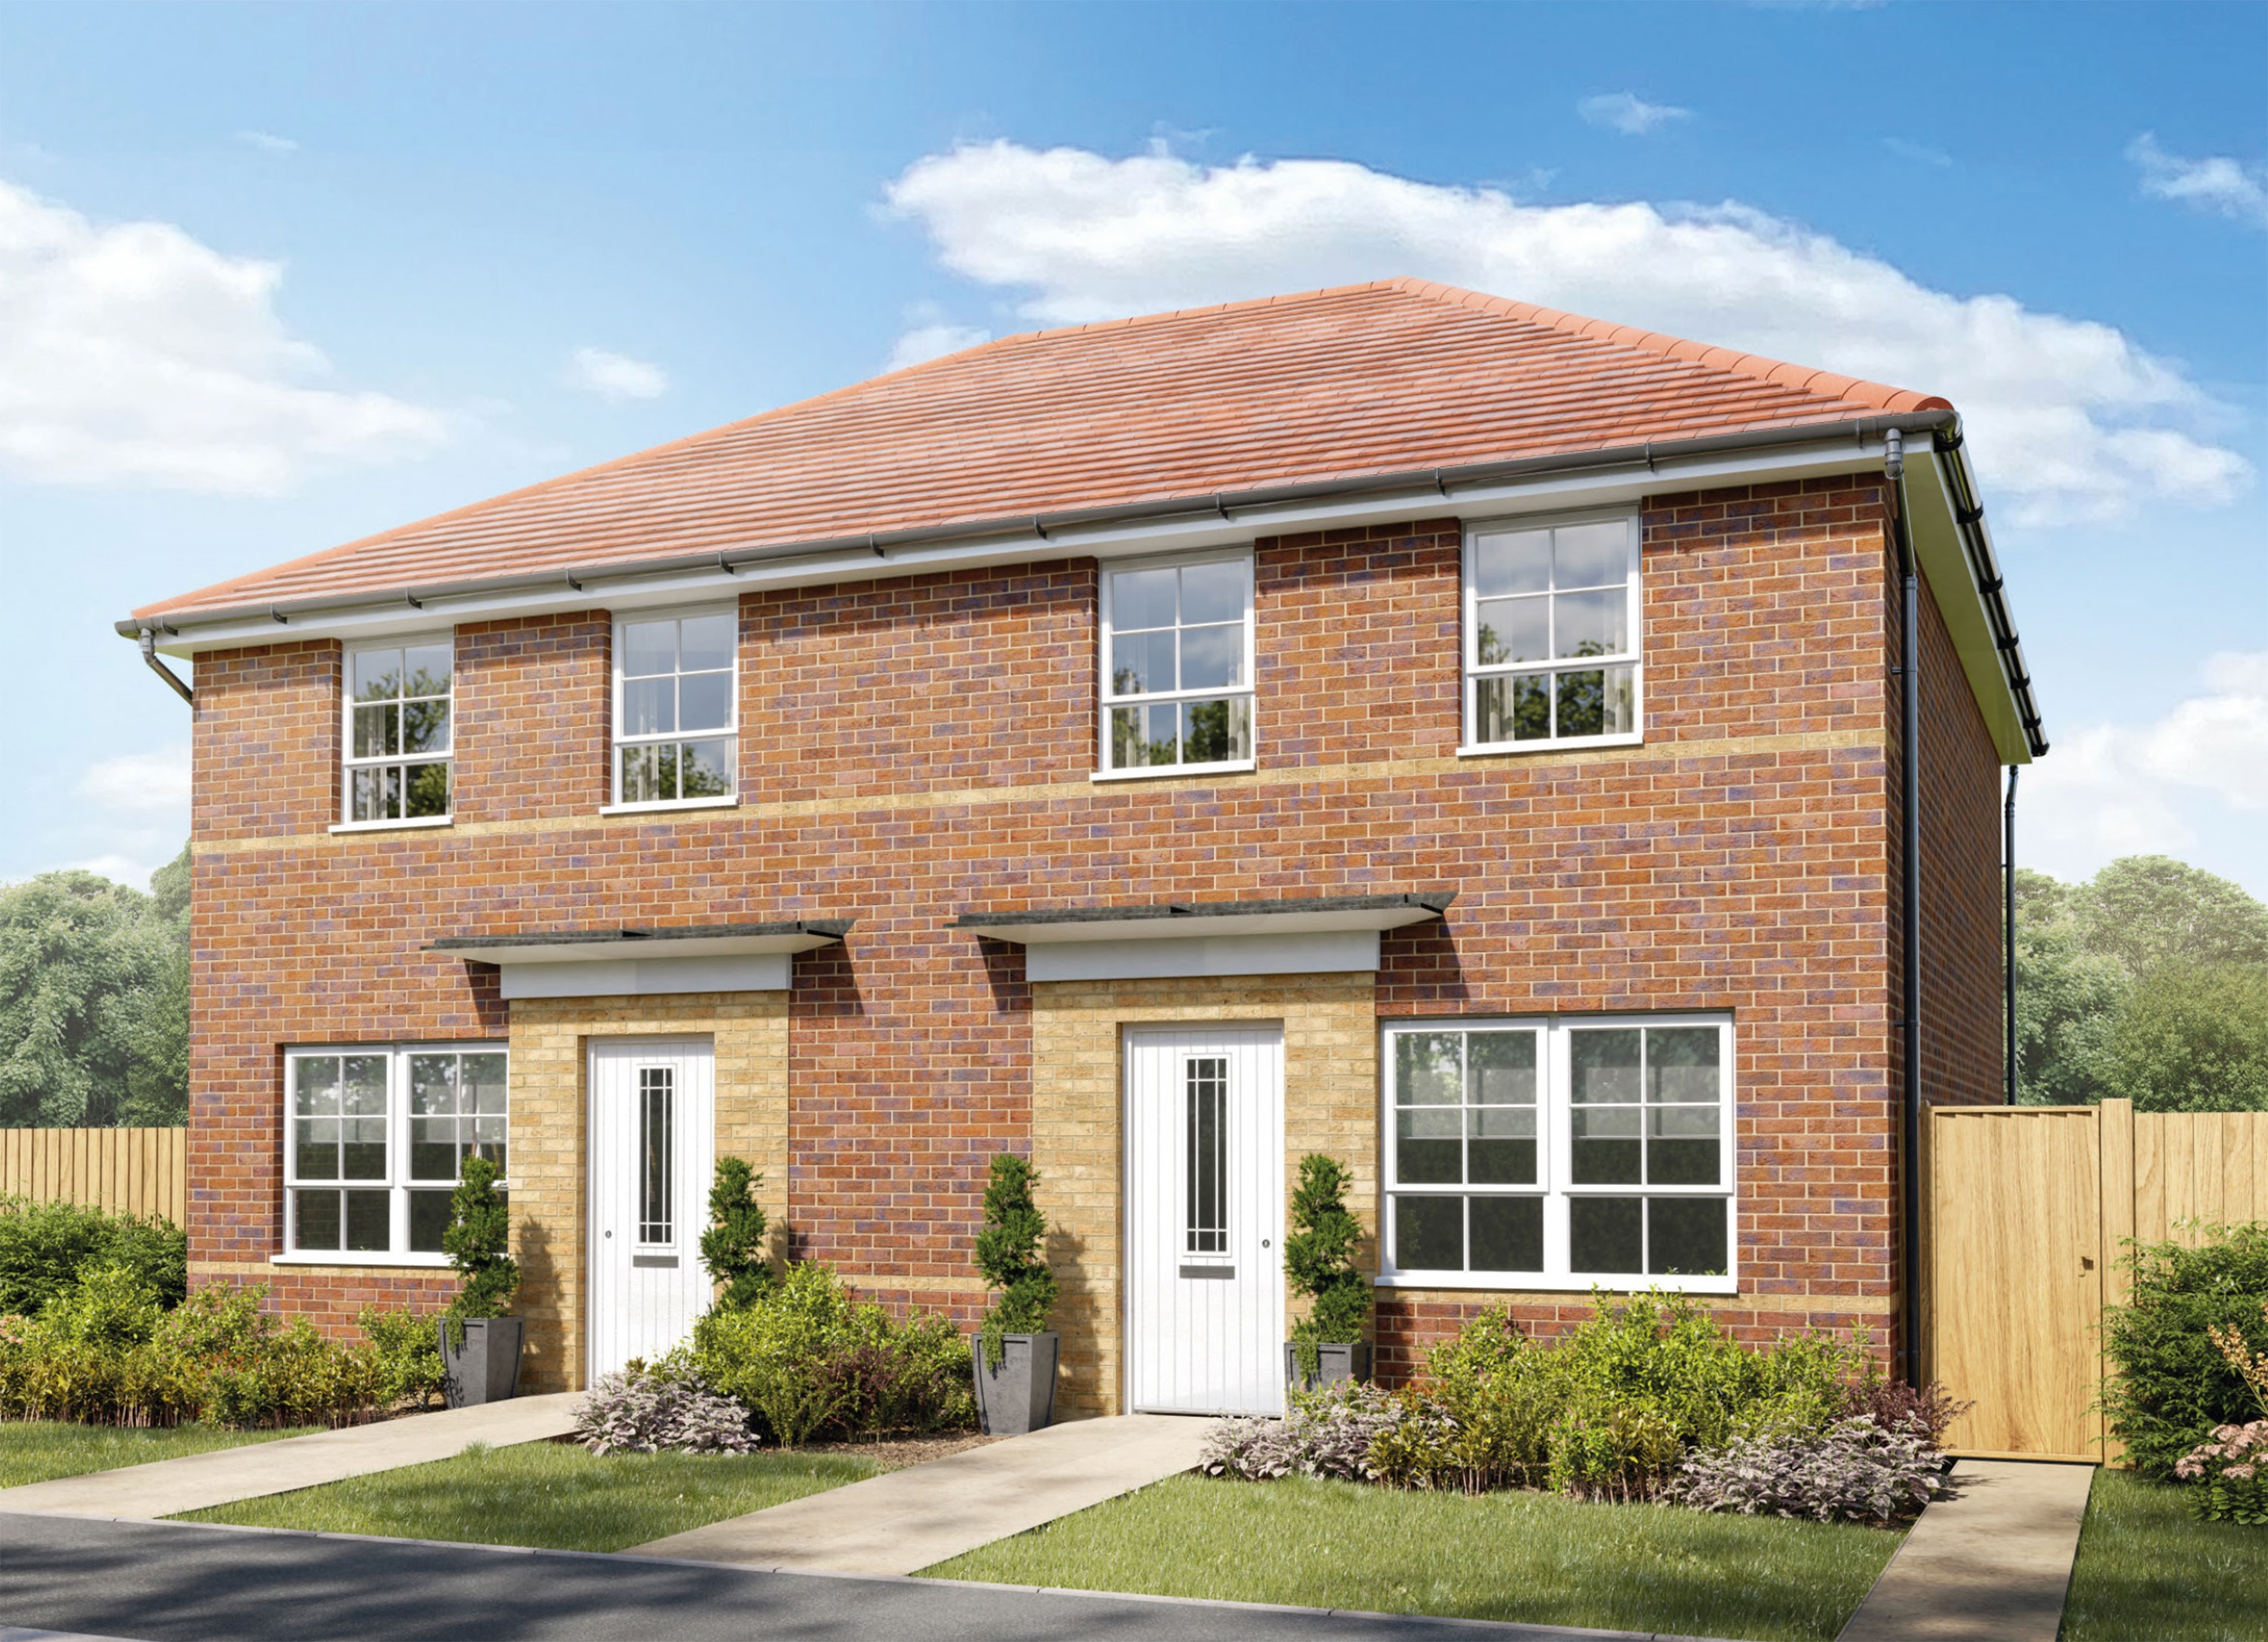 Property 2 of 7. Exterior CGI View Of Our 3 Bed Maidstone Home